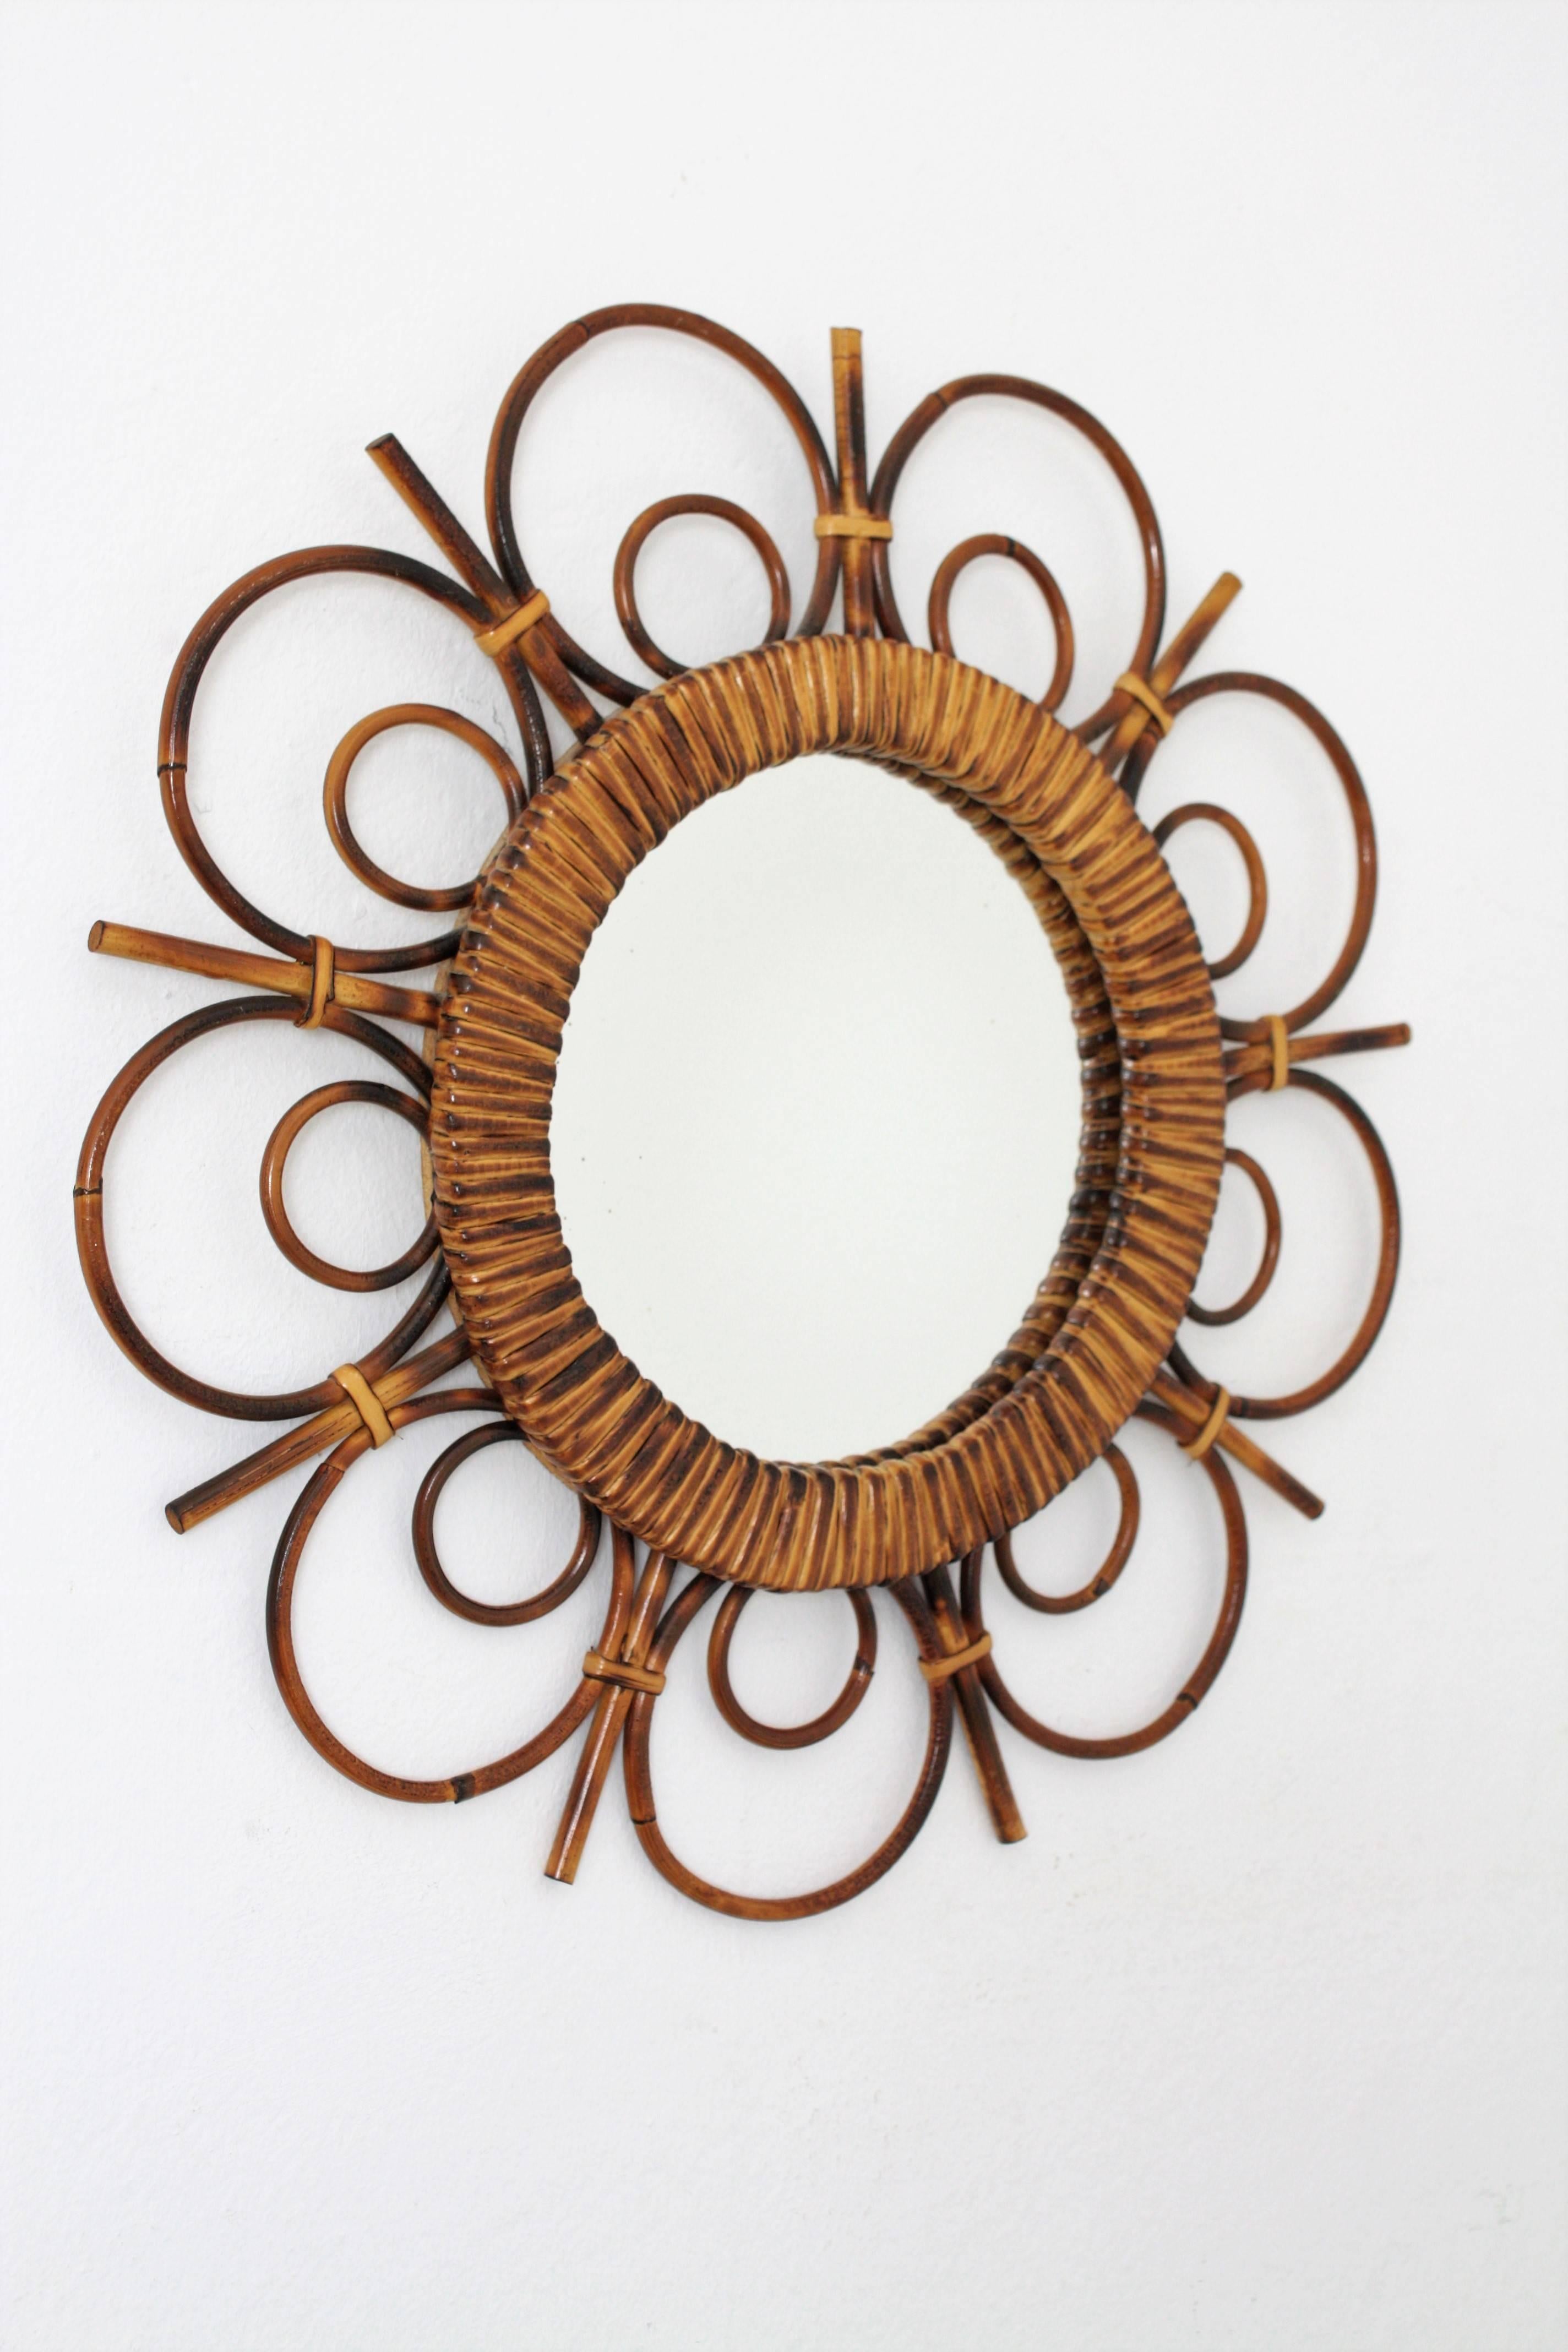 Spectacular hand-crafted rattan flower burst mirror. This piece has all the Mediterranean taste of the French Riviera.
A highly decorative piece to place alone or to create a wall decoration with other bamboo or rattan mirrors.
France